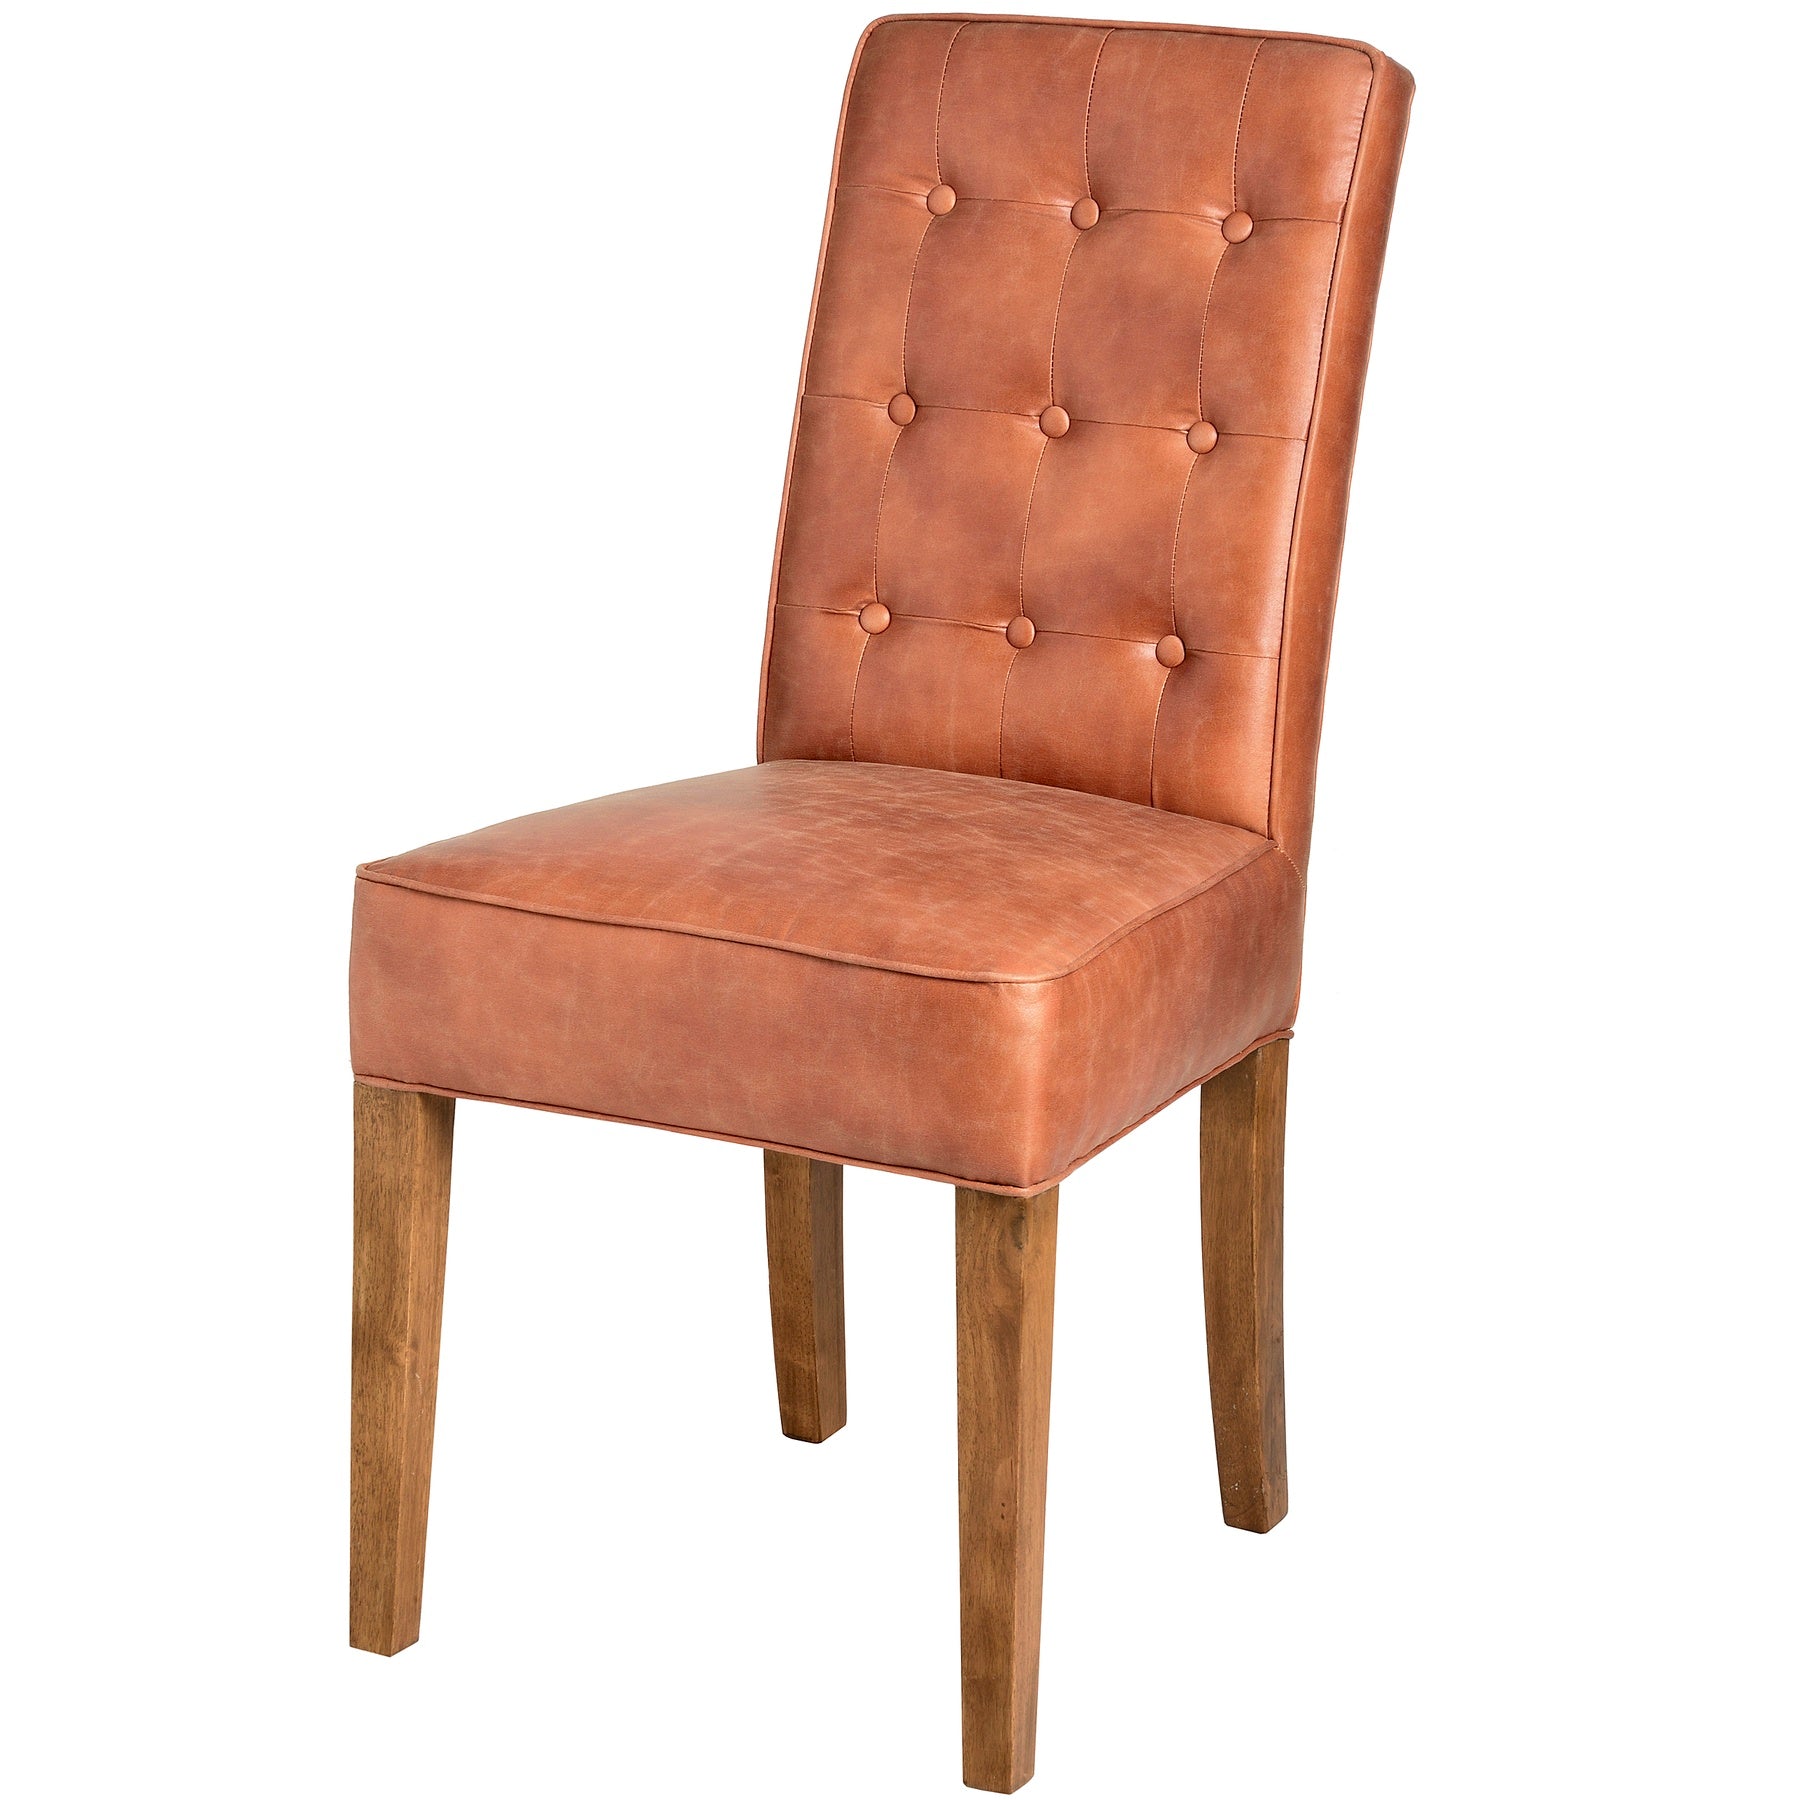 View Tan Faux Leather Dining Chair information